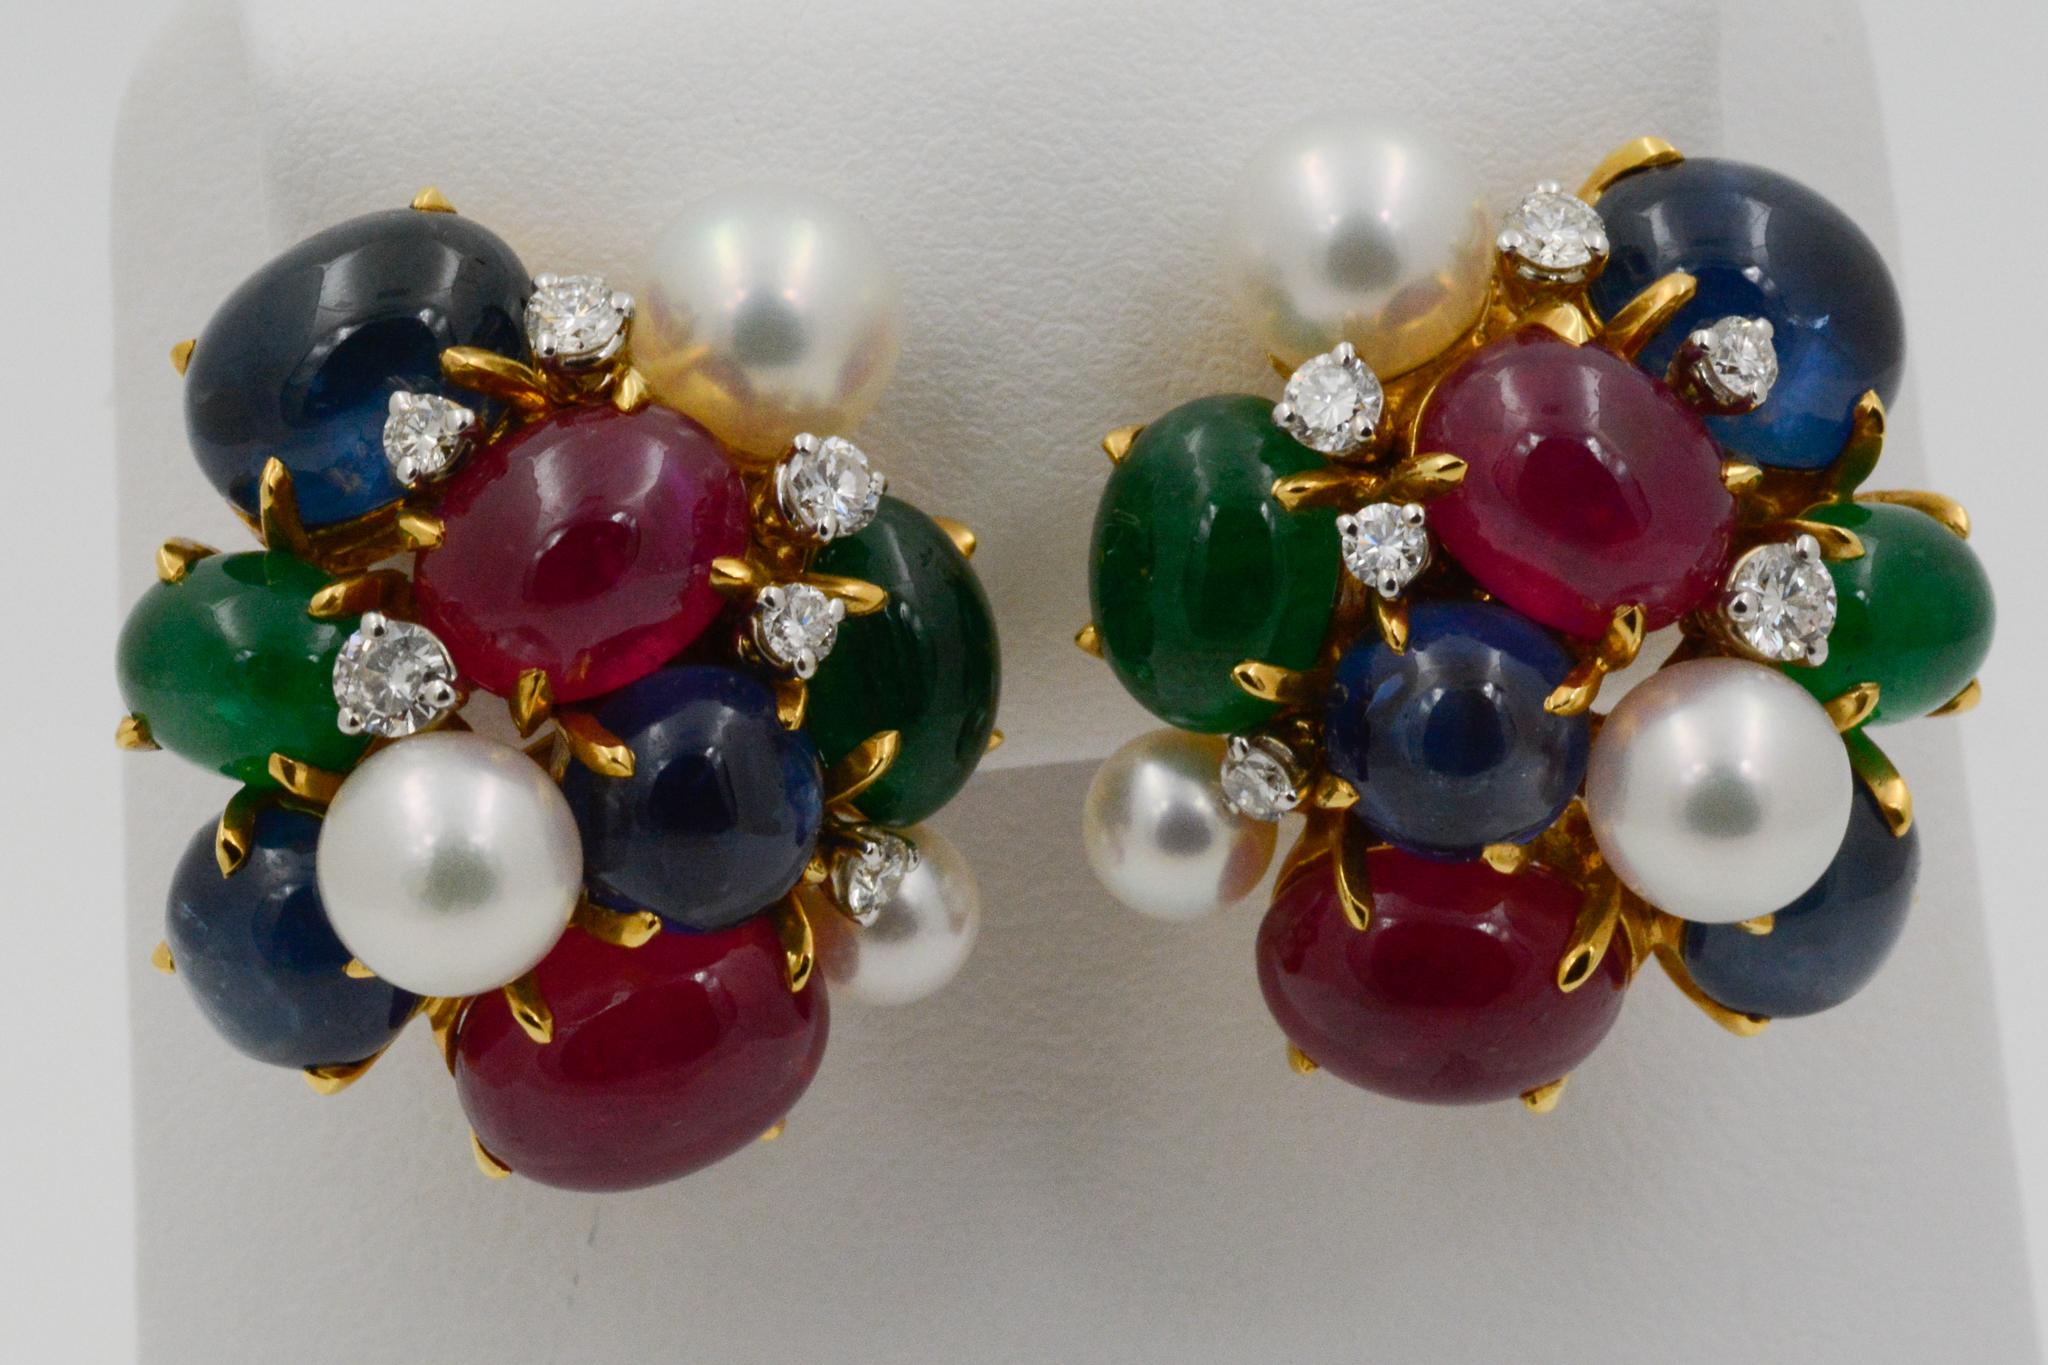 From Seaman Schepps, these 18k yellow gold Bubble clip earrings feature four oval cabochon rubies, four oval cabochon emeralds, four round cabochon blue sapphires, two oval cabochon blue sapphires, six white pearls, and 12 round brilliant cut